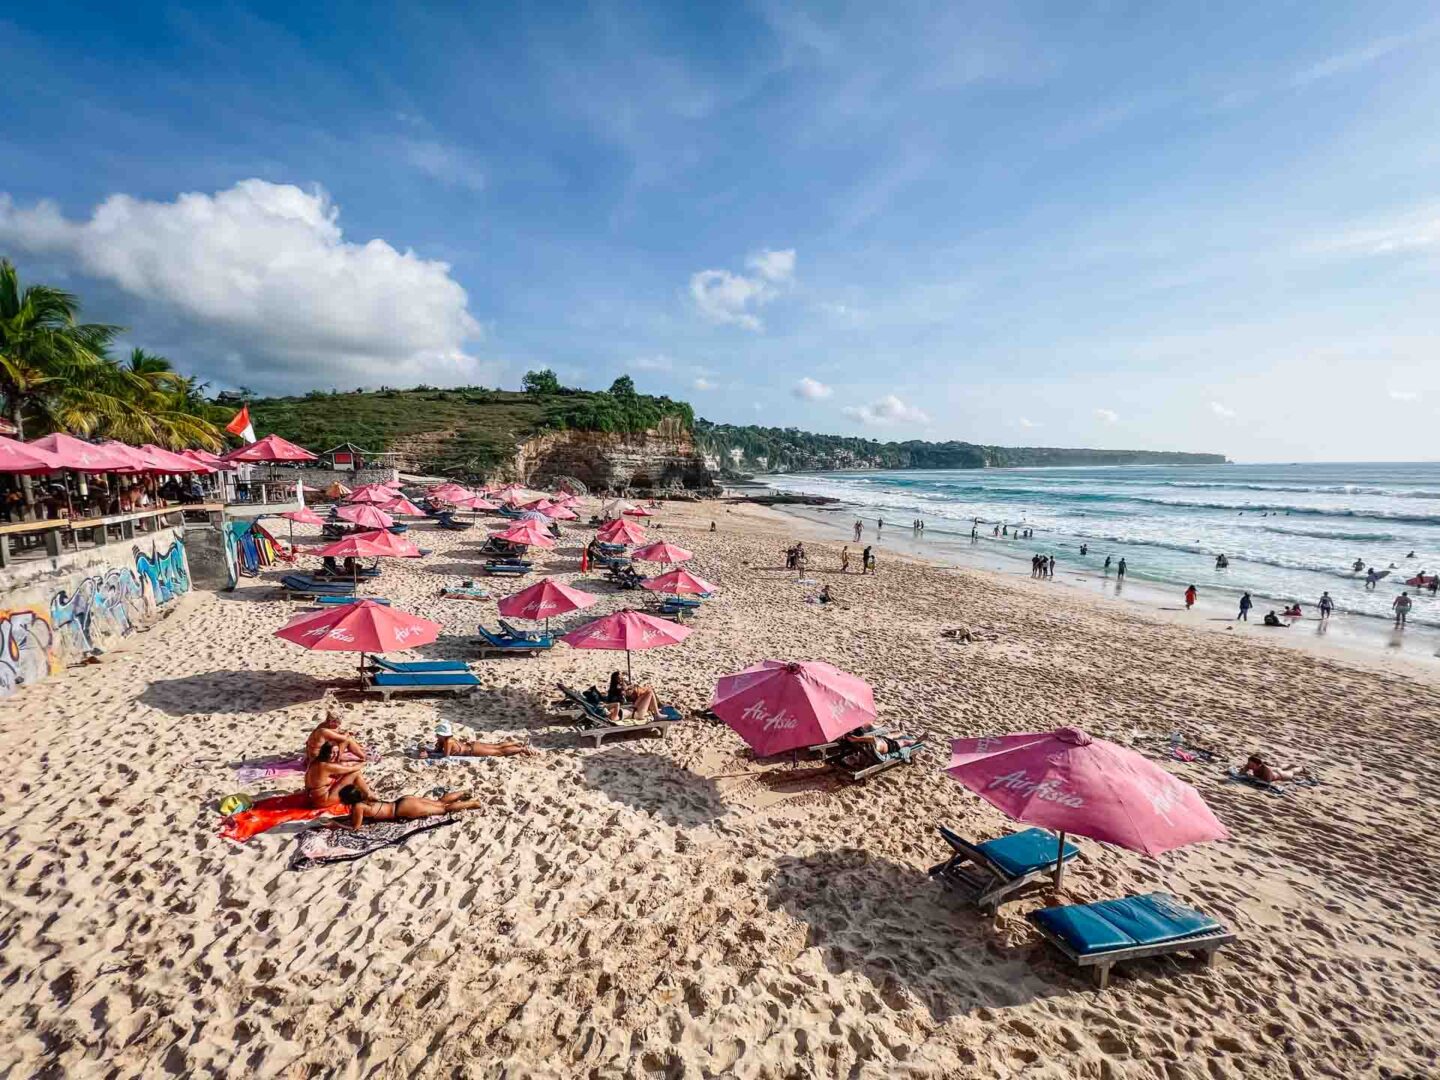 10 Clean beaches in Bali to avoid plastic pollution (source: Johnny Melon)